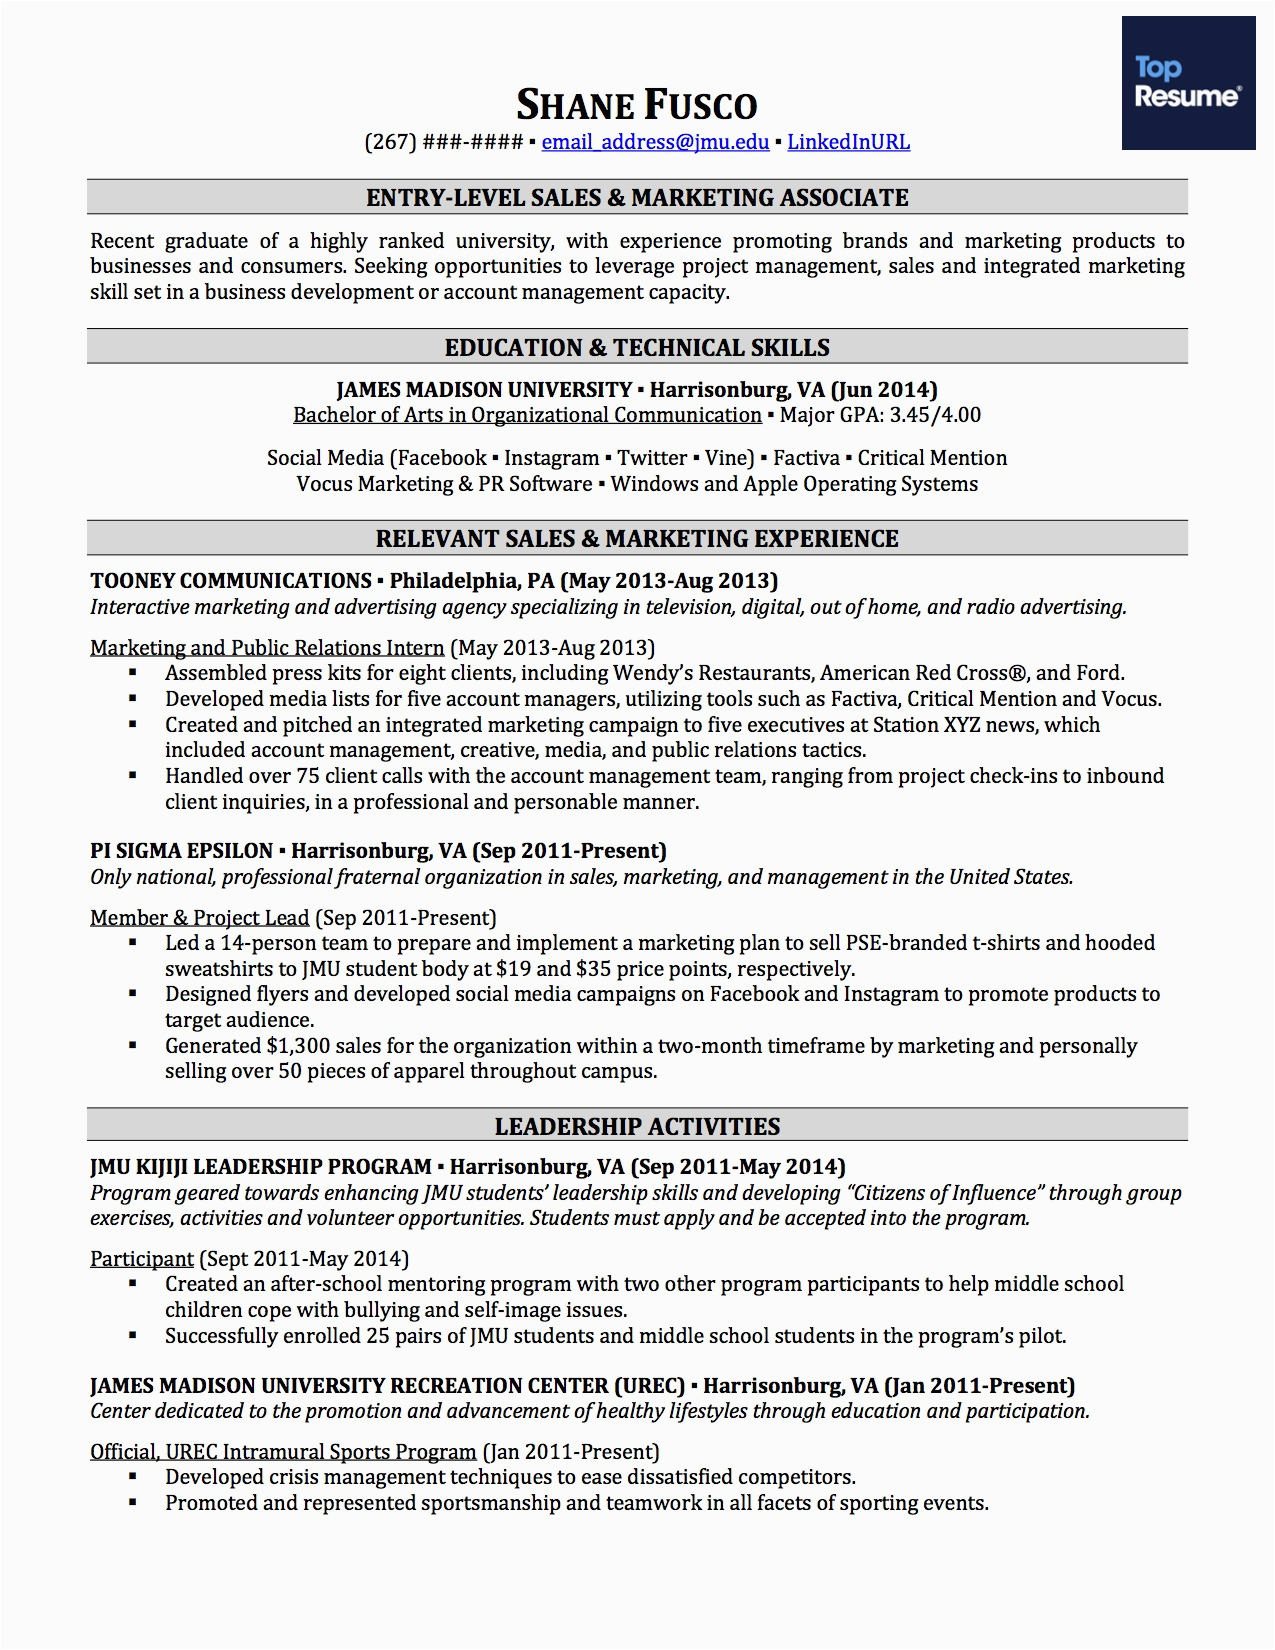 Sample Resume for someone with No Job Experience How to Write A Resume with No Job Experience